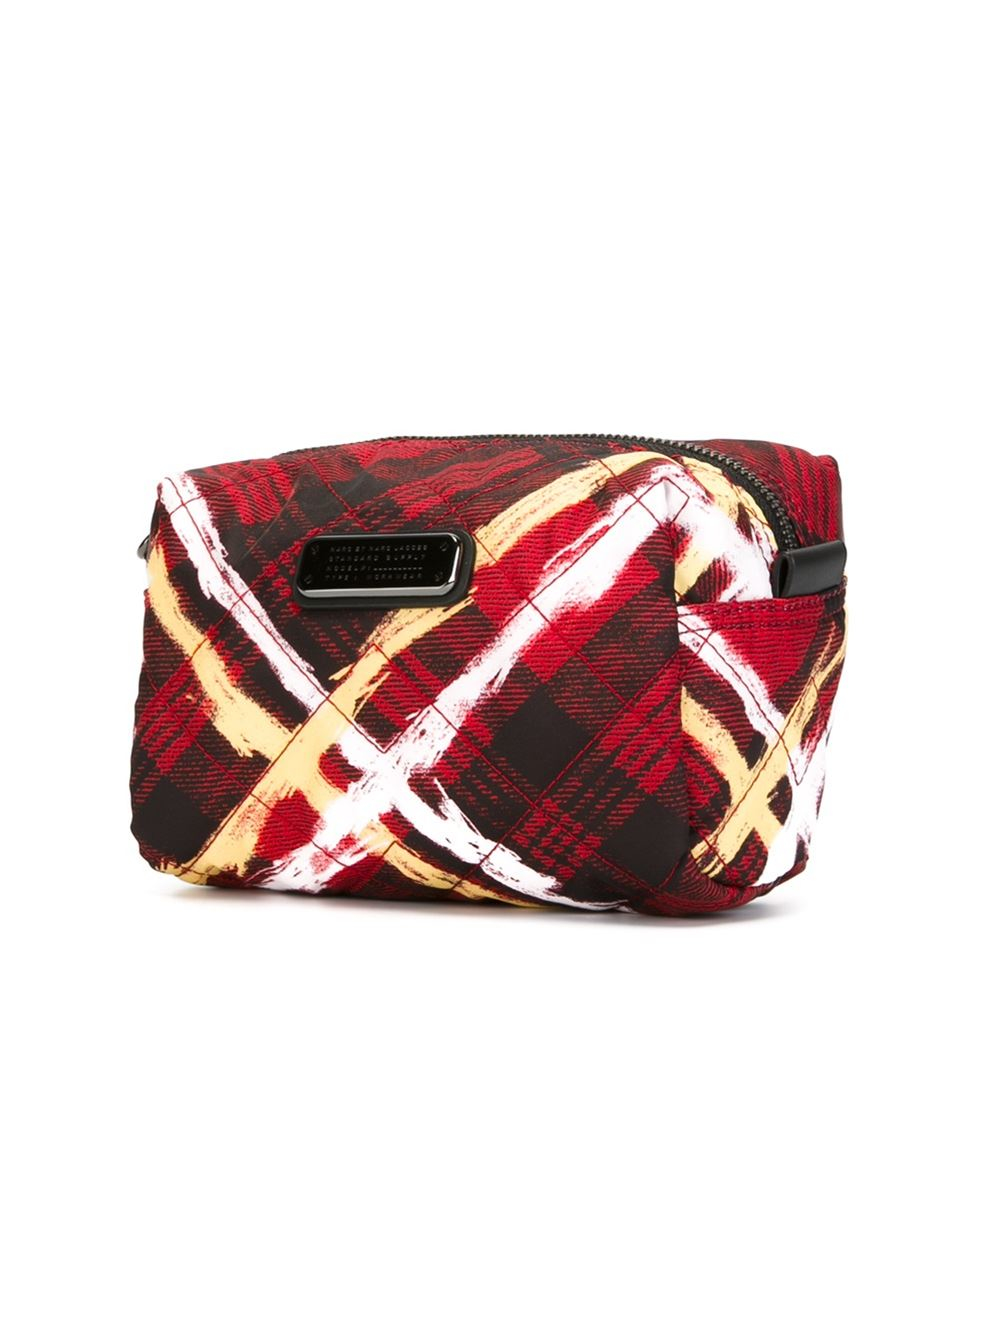 Lyst - Marc By Marc Jacobs Plaid Print Make-up Bag in Red